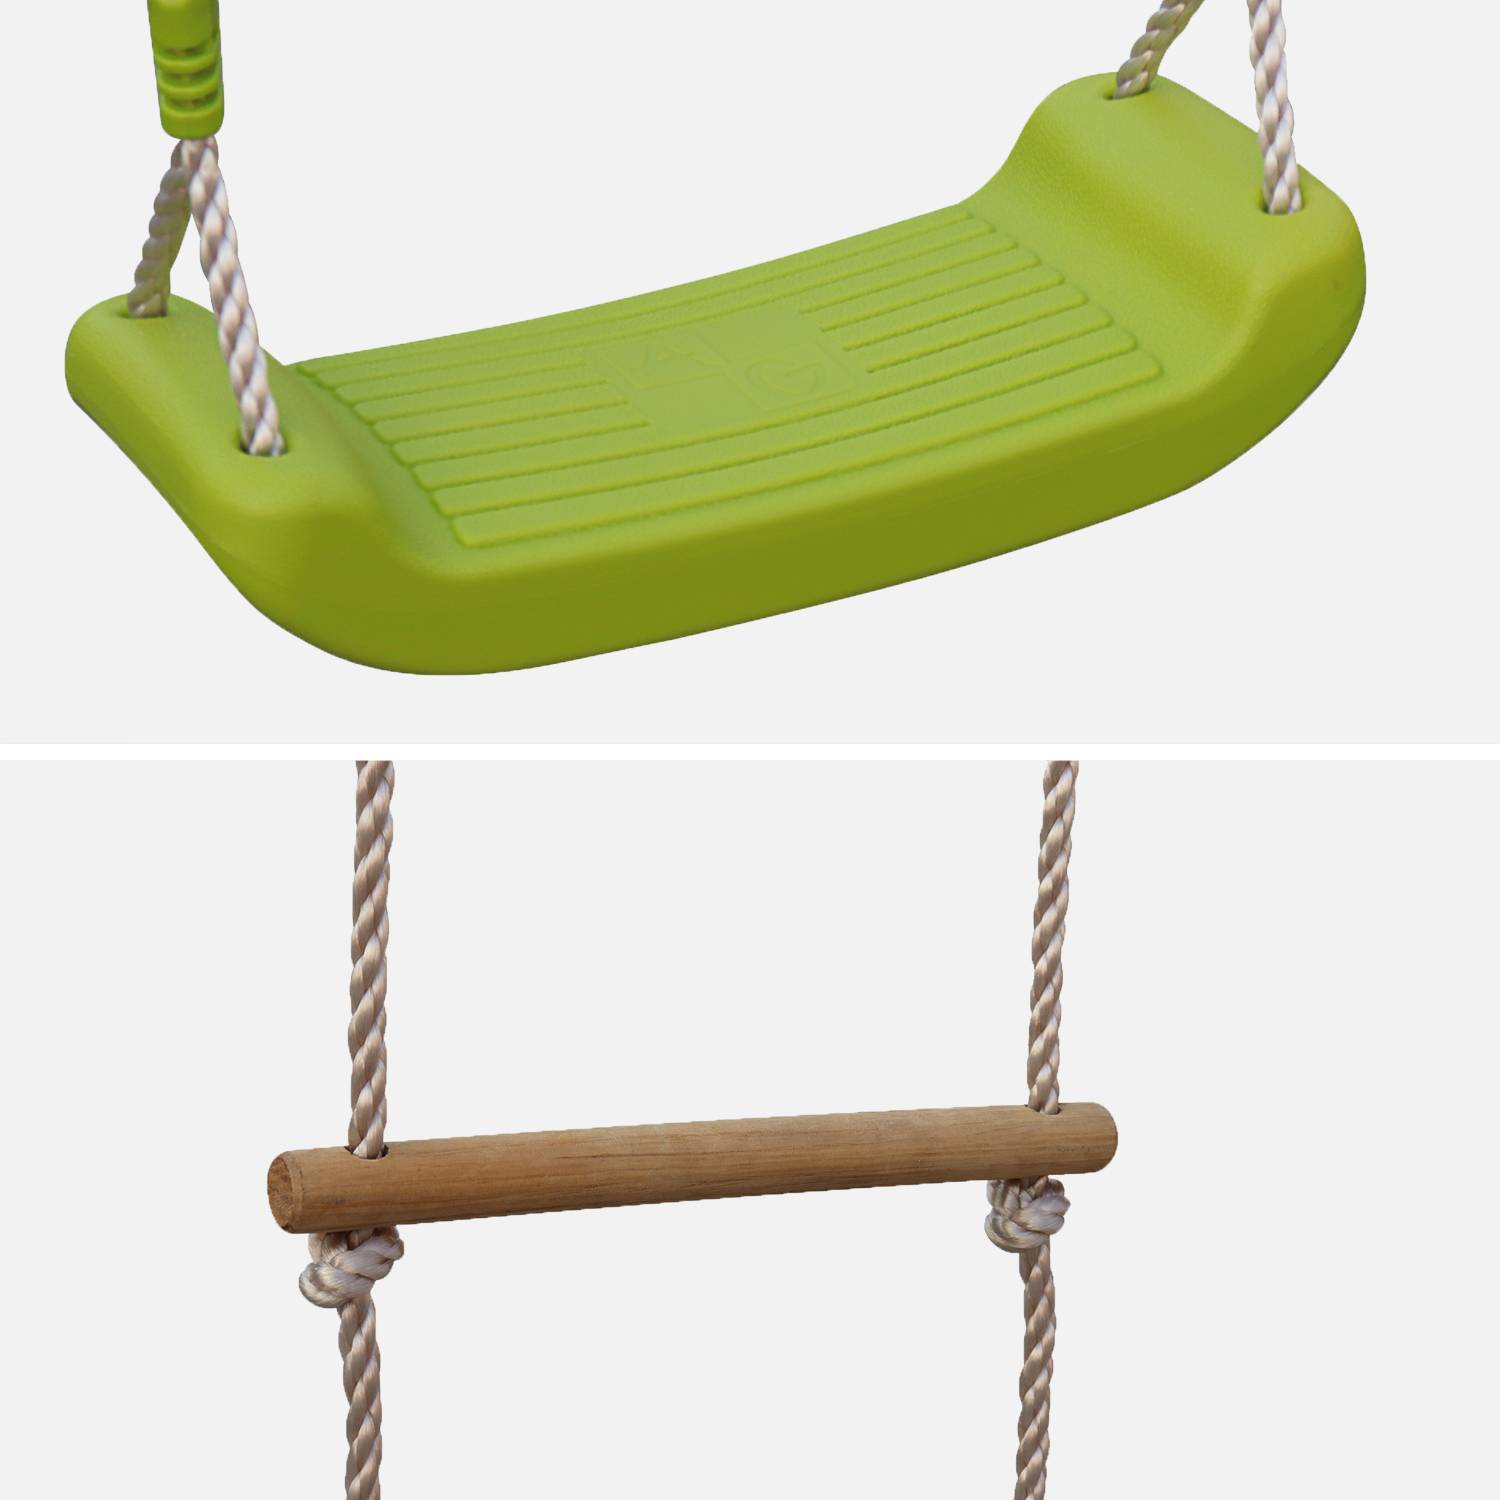 Wooden swing set with two swings and climbing rope ladder - pressure treated FSC pine - Mistral,sweeek,Photo4